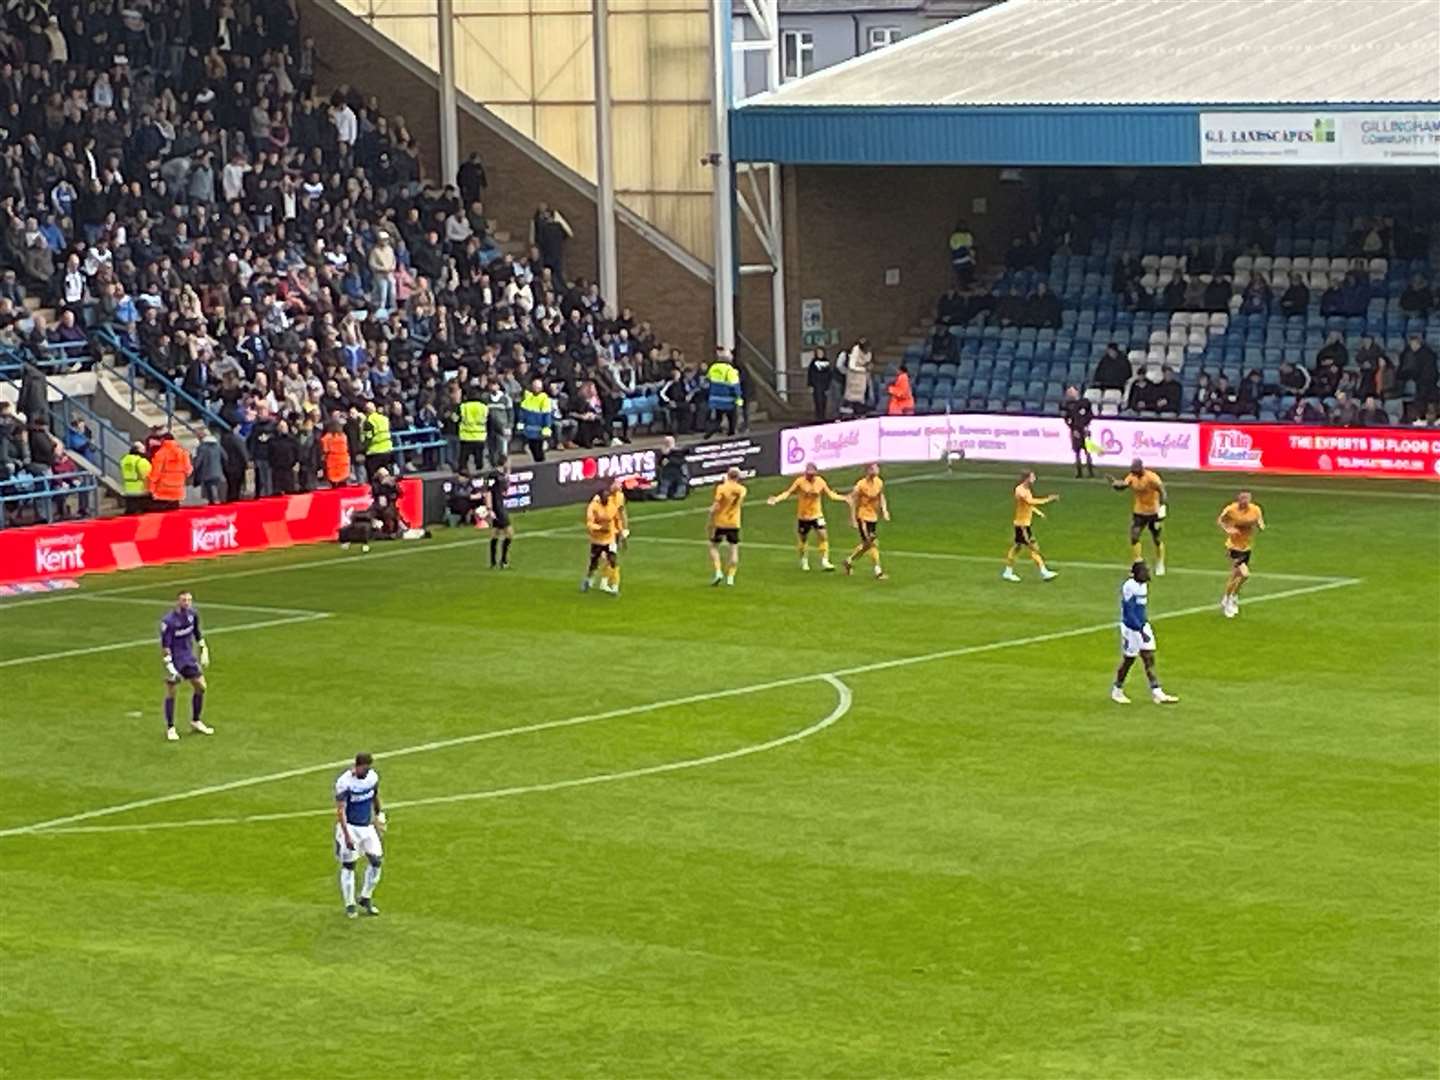 Trouble at Priestfield afer Omar Bogle scored his first penalty for Newport